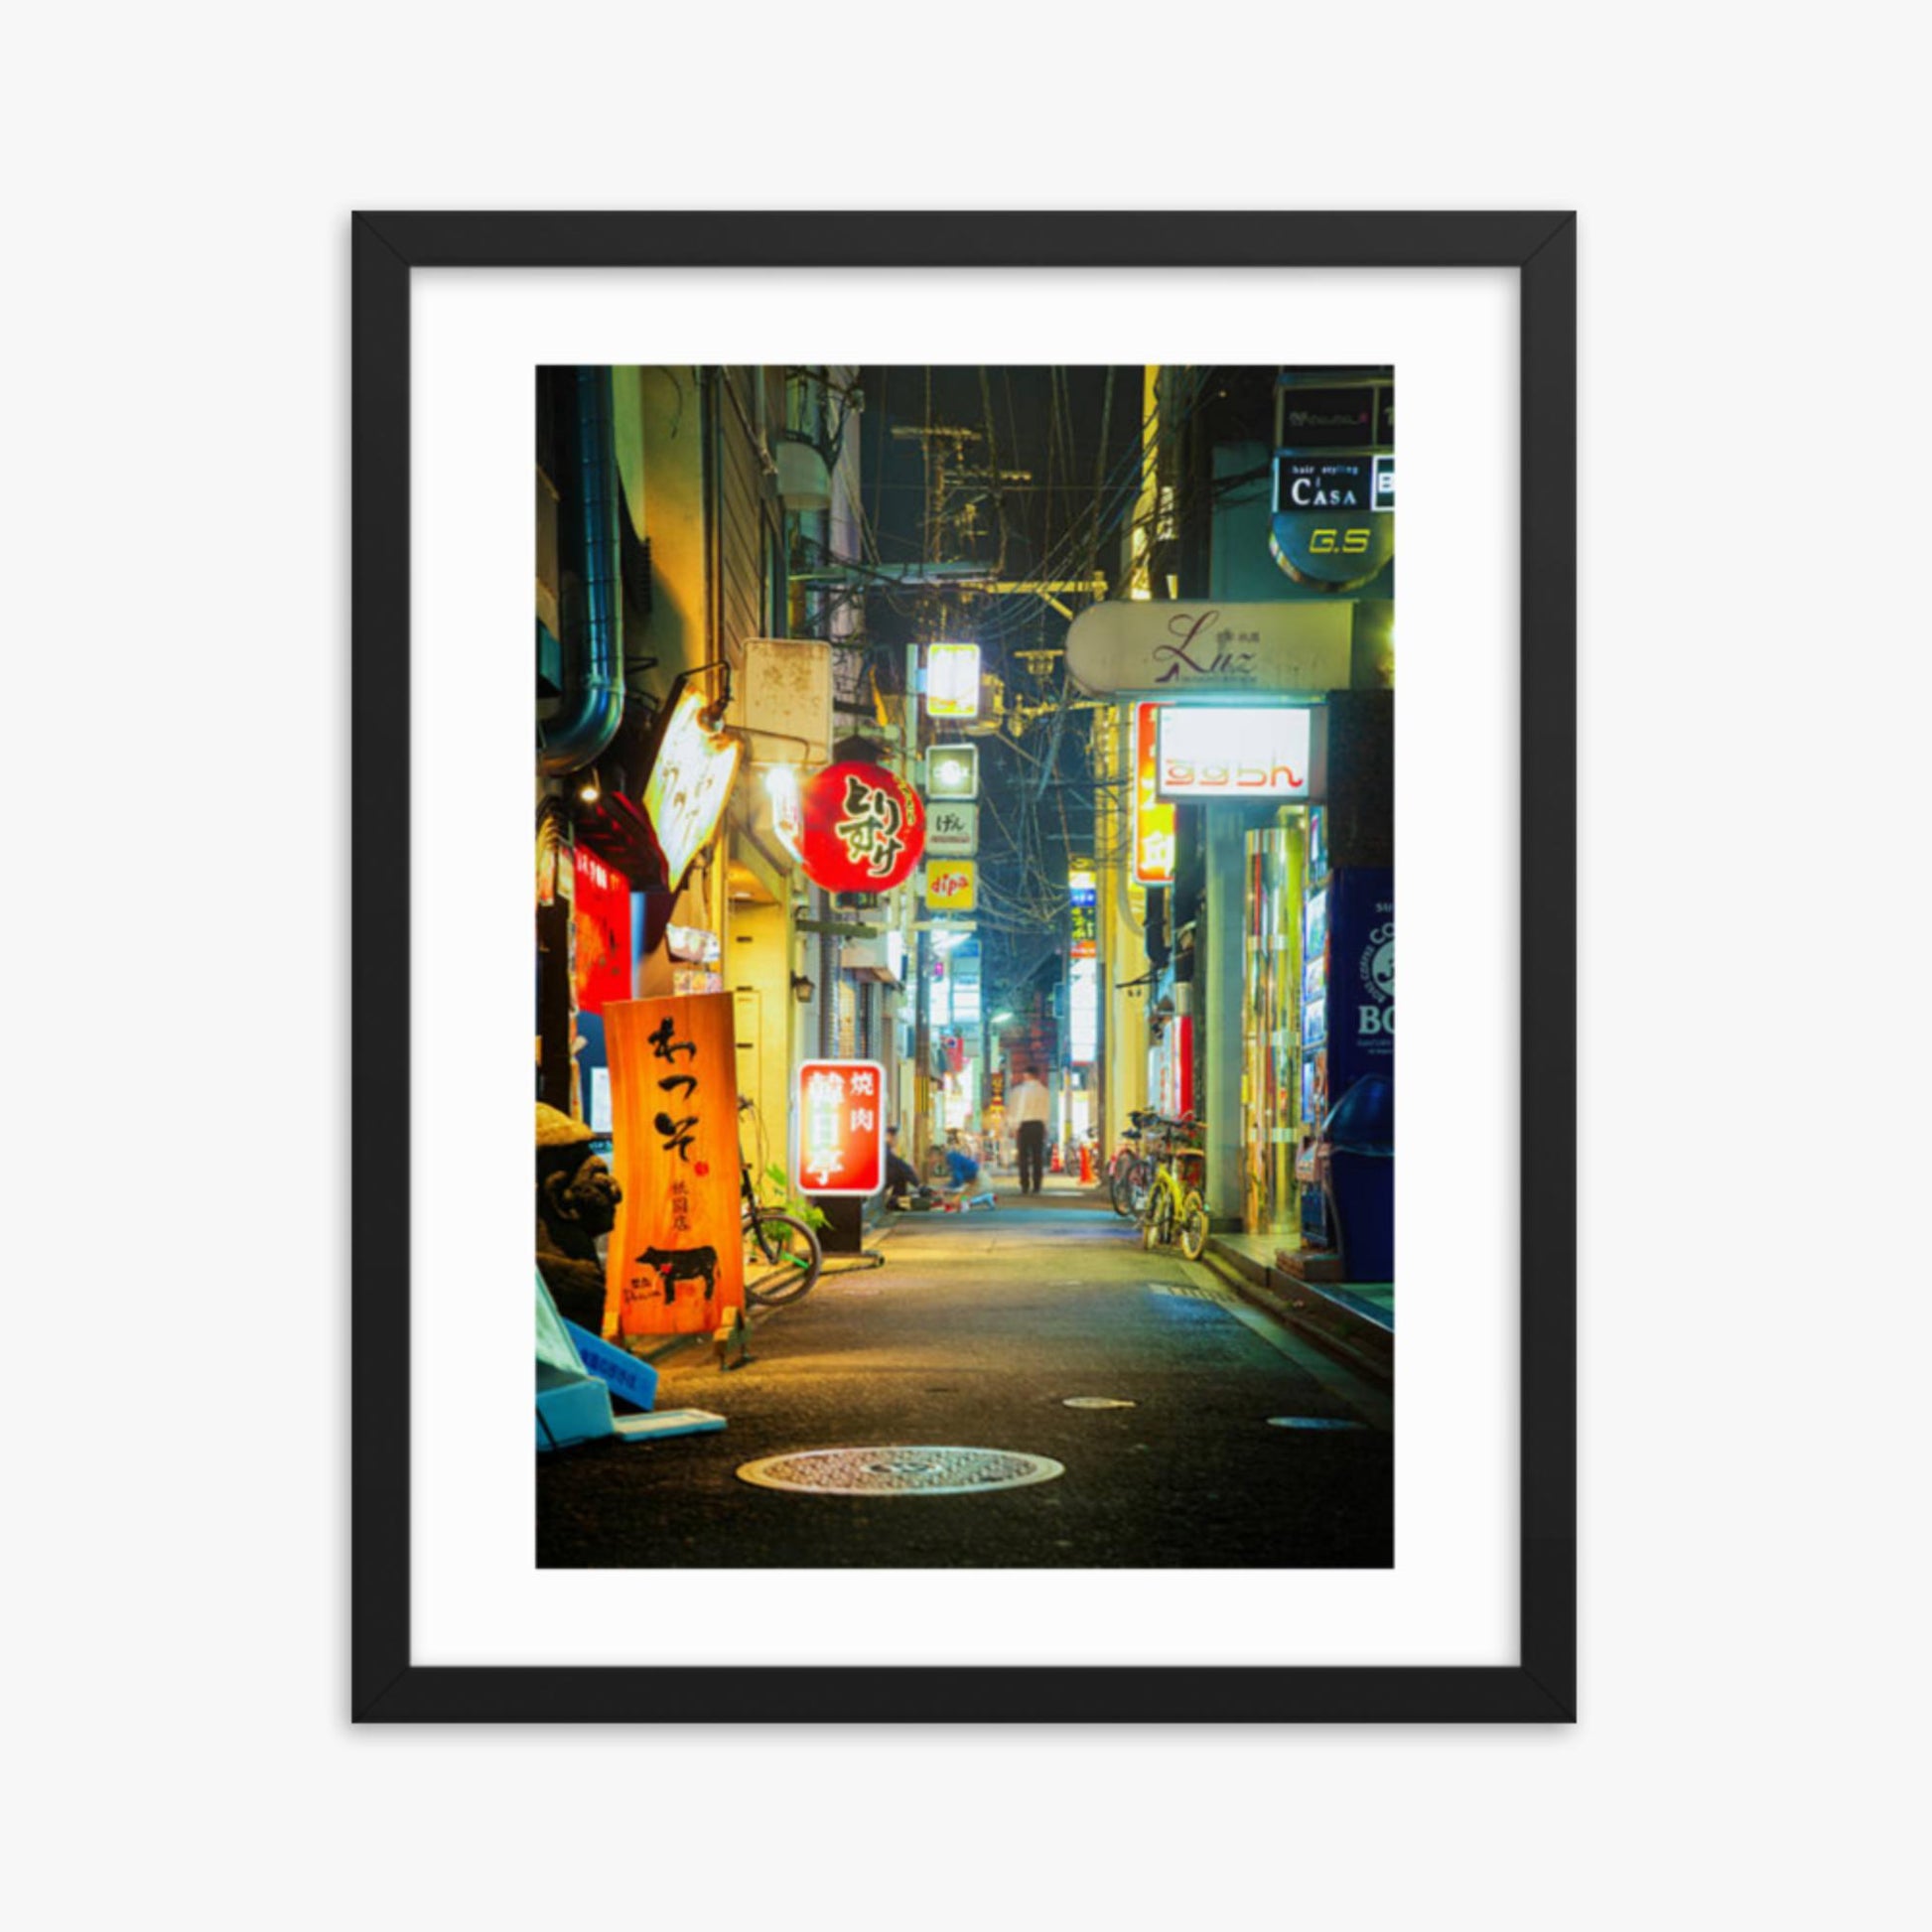 Kyoto, Japan backstreet at night 16x20 in Poster With Black Frame